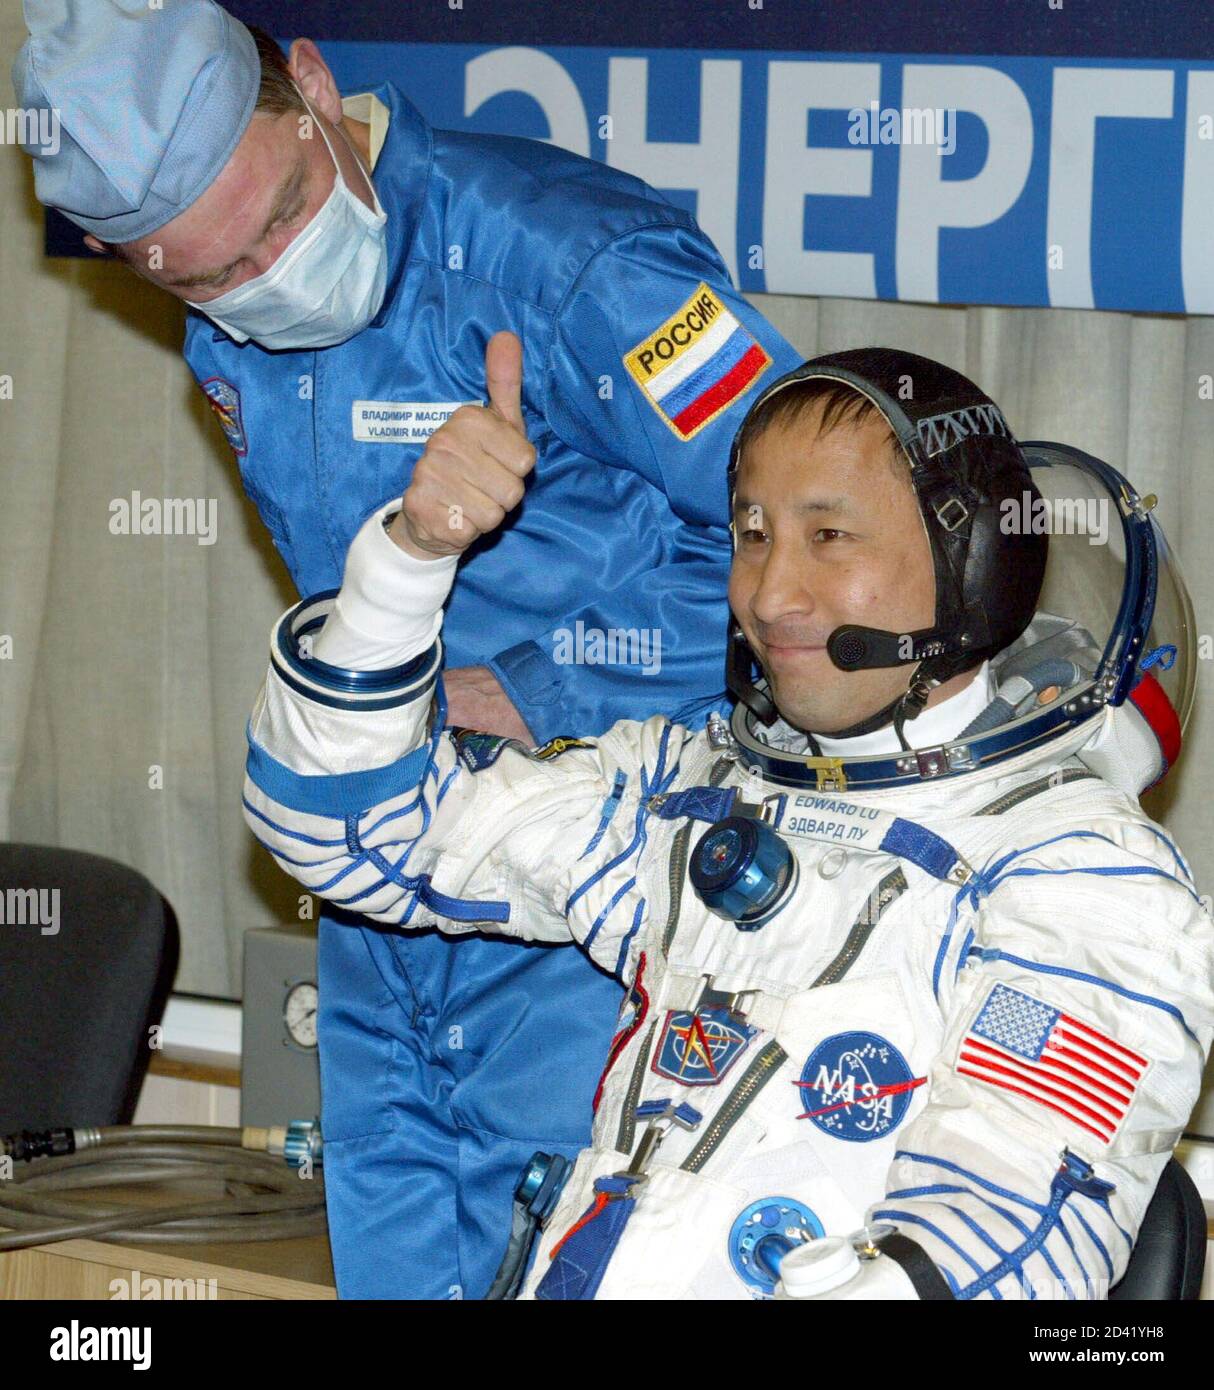 U.S. astronaut Edward Lu gives a thumbs up as a Russian specialist stands  by after dressing up in his space suit in Baikonur, April 26, 2003. [Lu and  Russian cosmonaut Yuri Malenchenko]